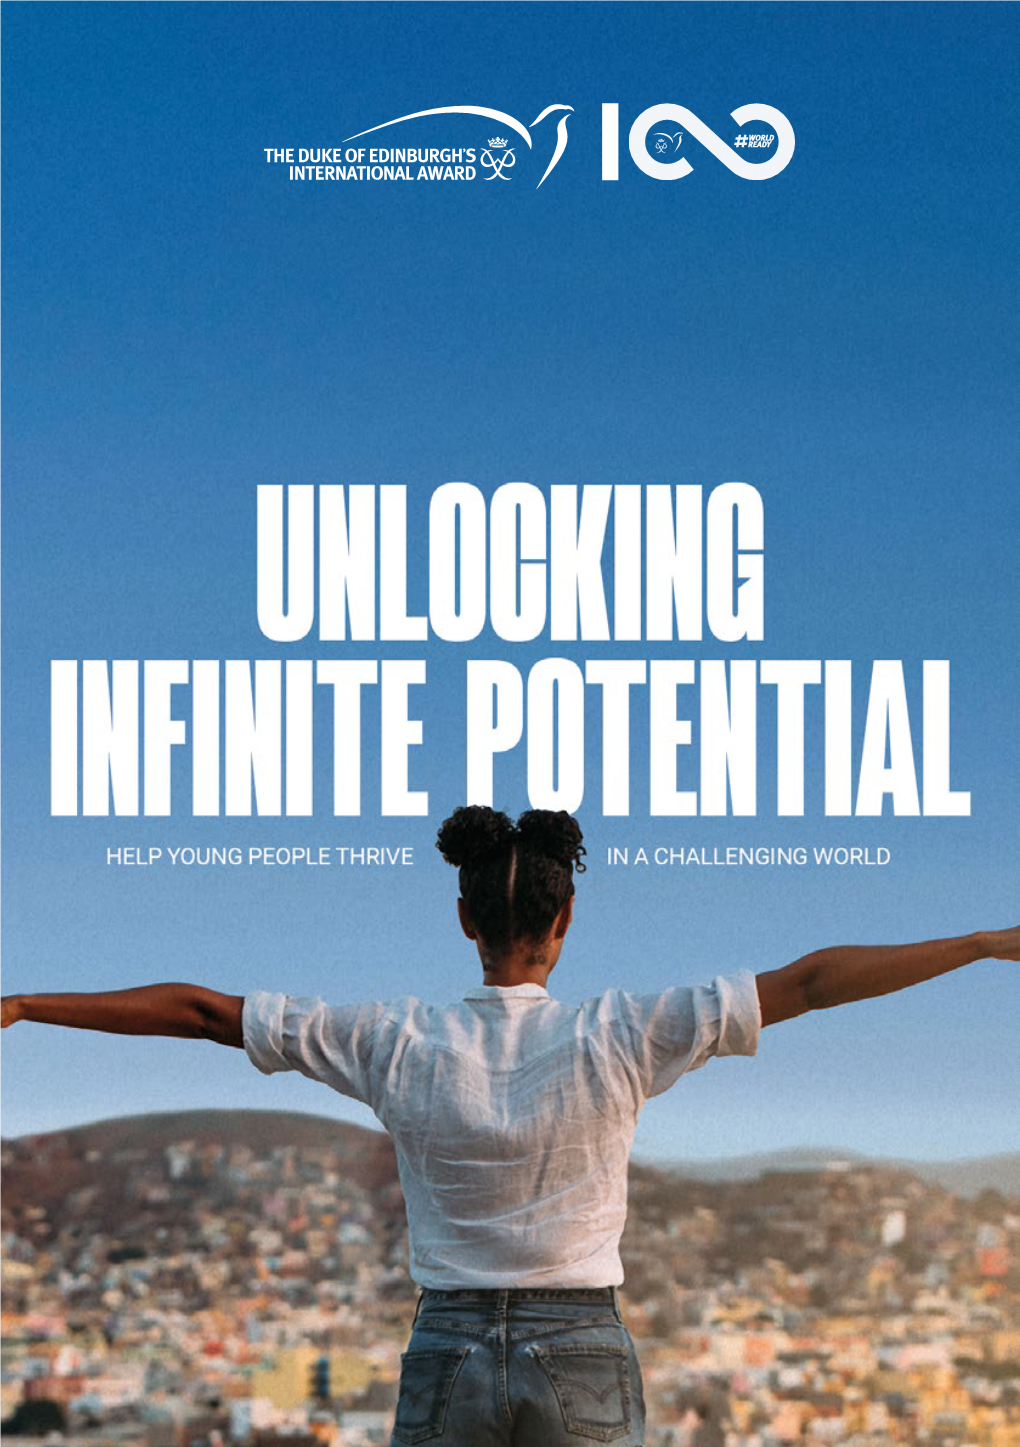 Worldready Unlockingchampion Infiniteinfinite Potential Potential: Leave a Lasting Legacy for Young People Today and in the Future